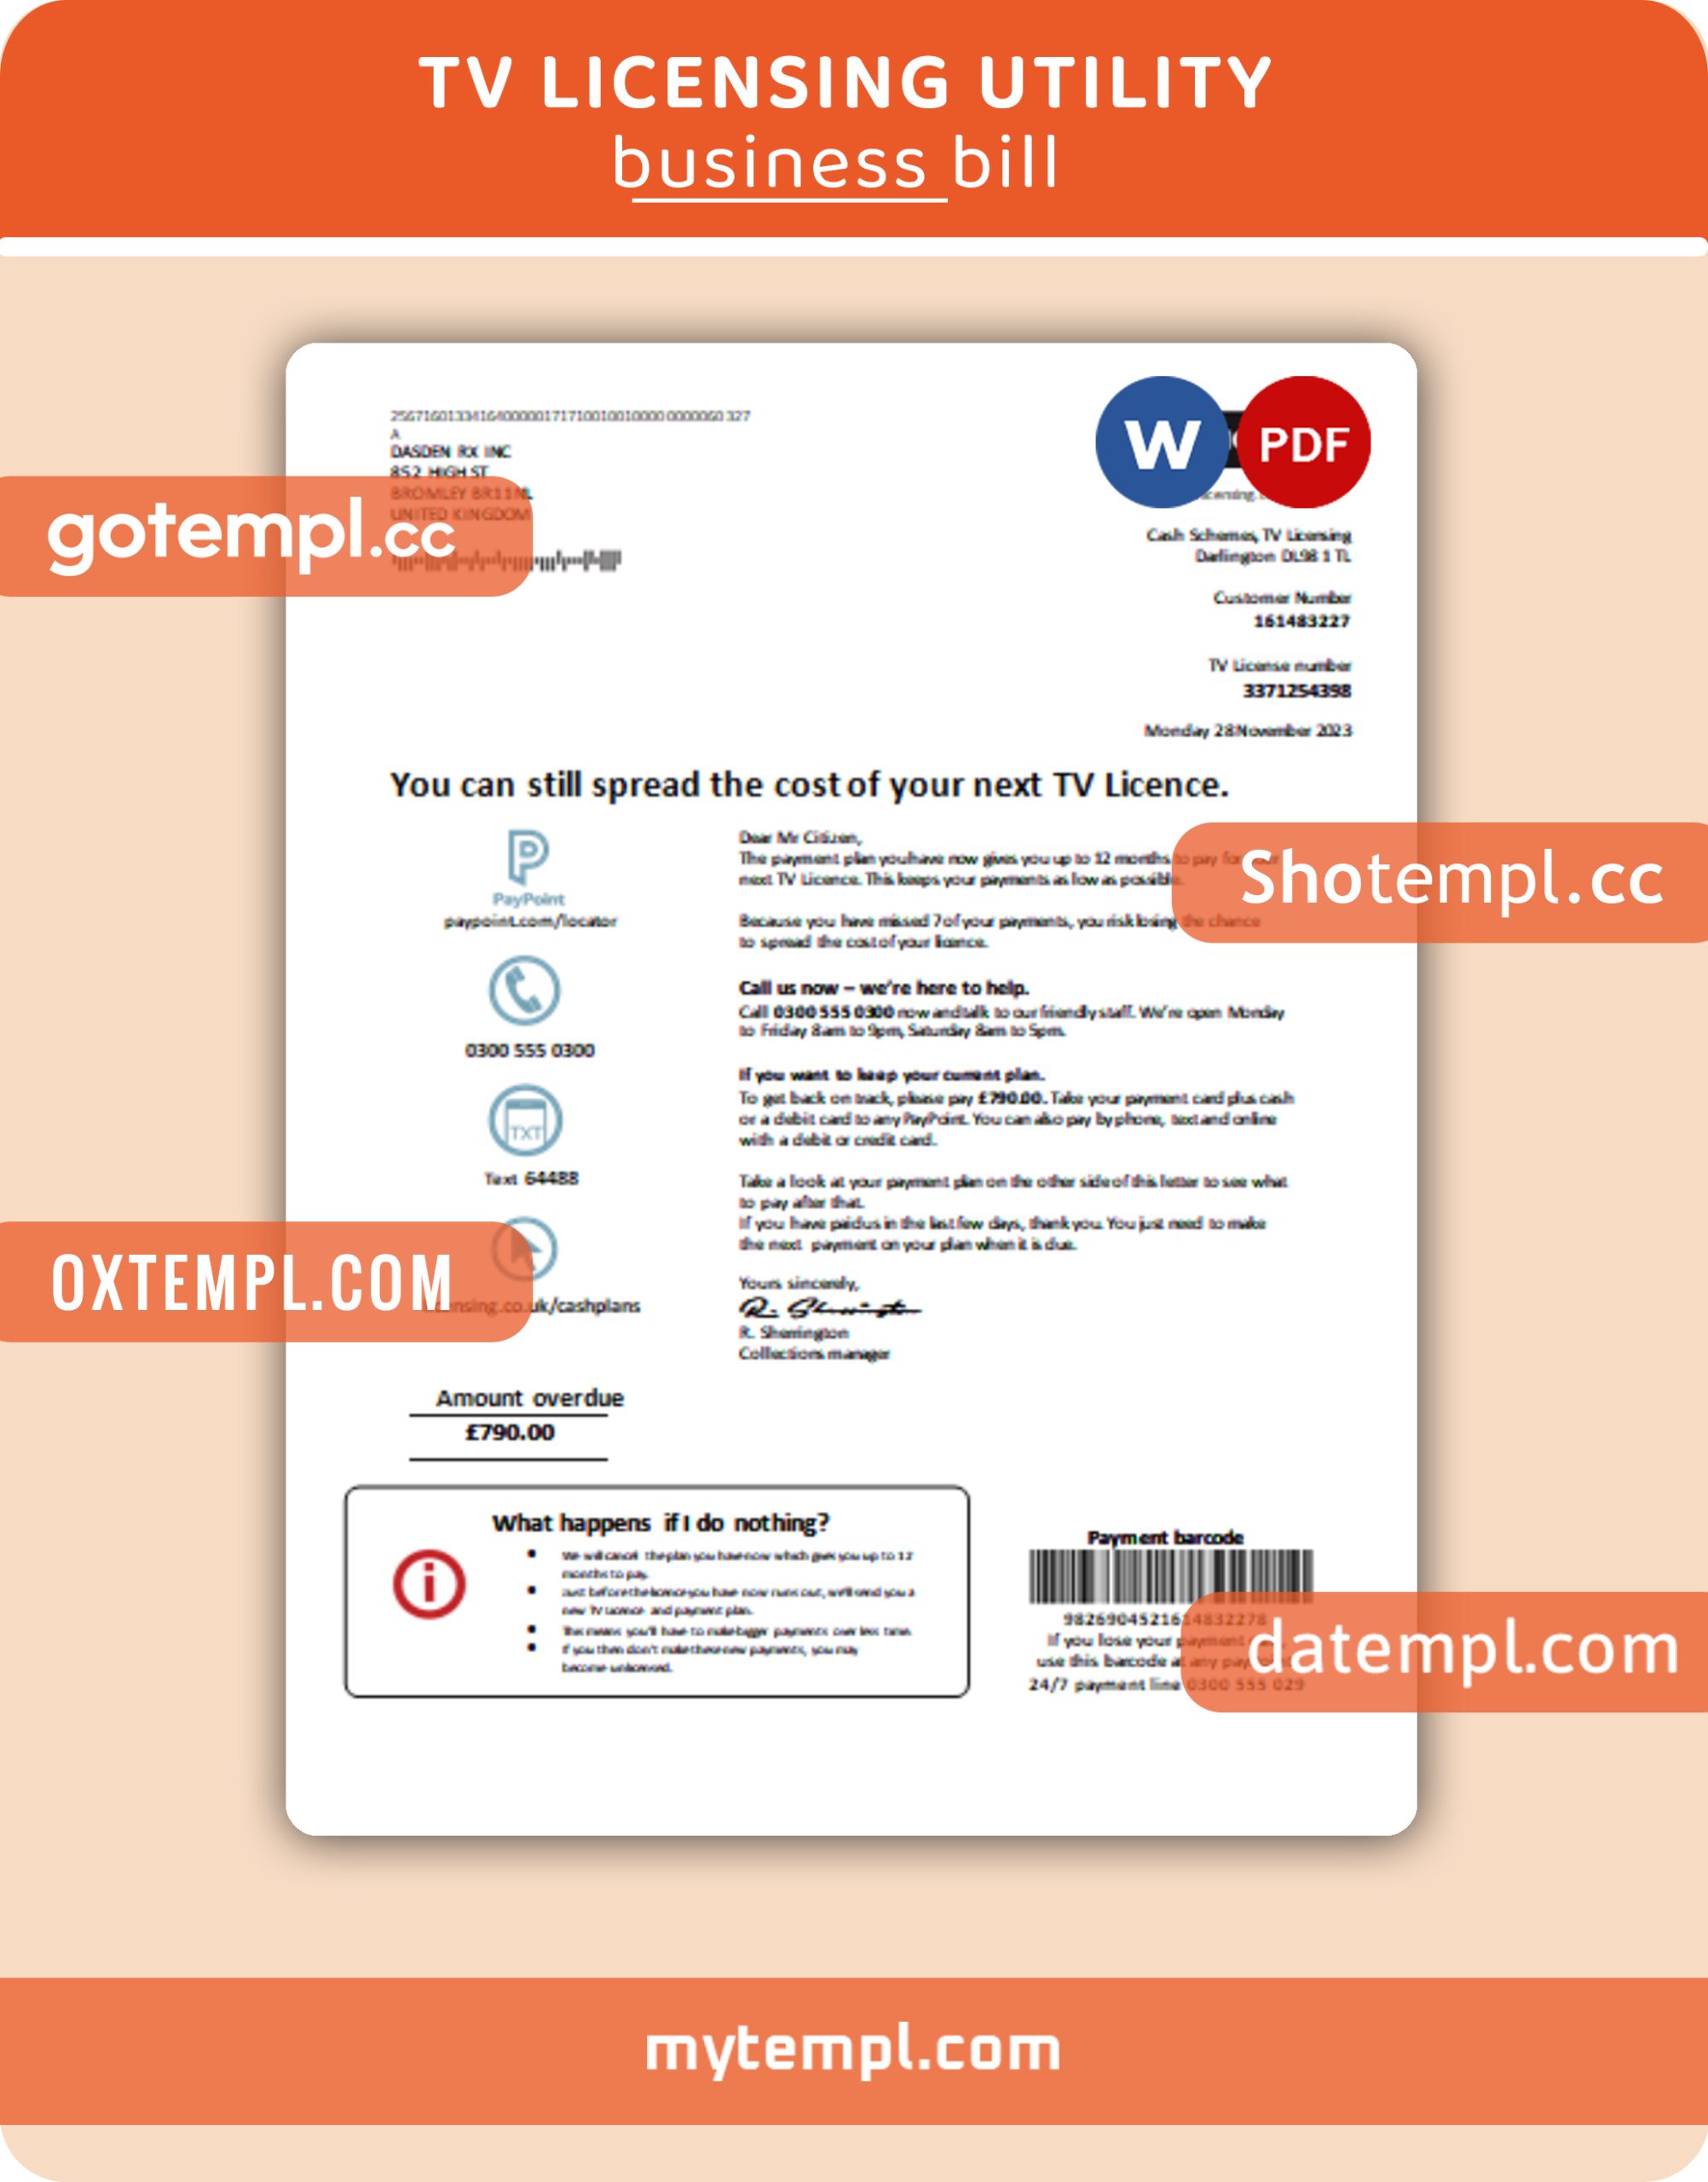 TV Licensing business utility bill, PDF and WORD template